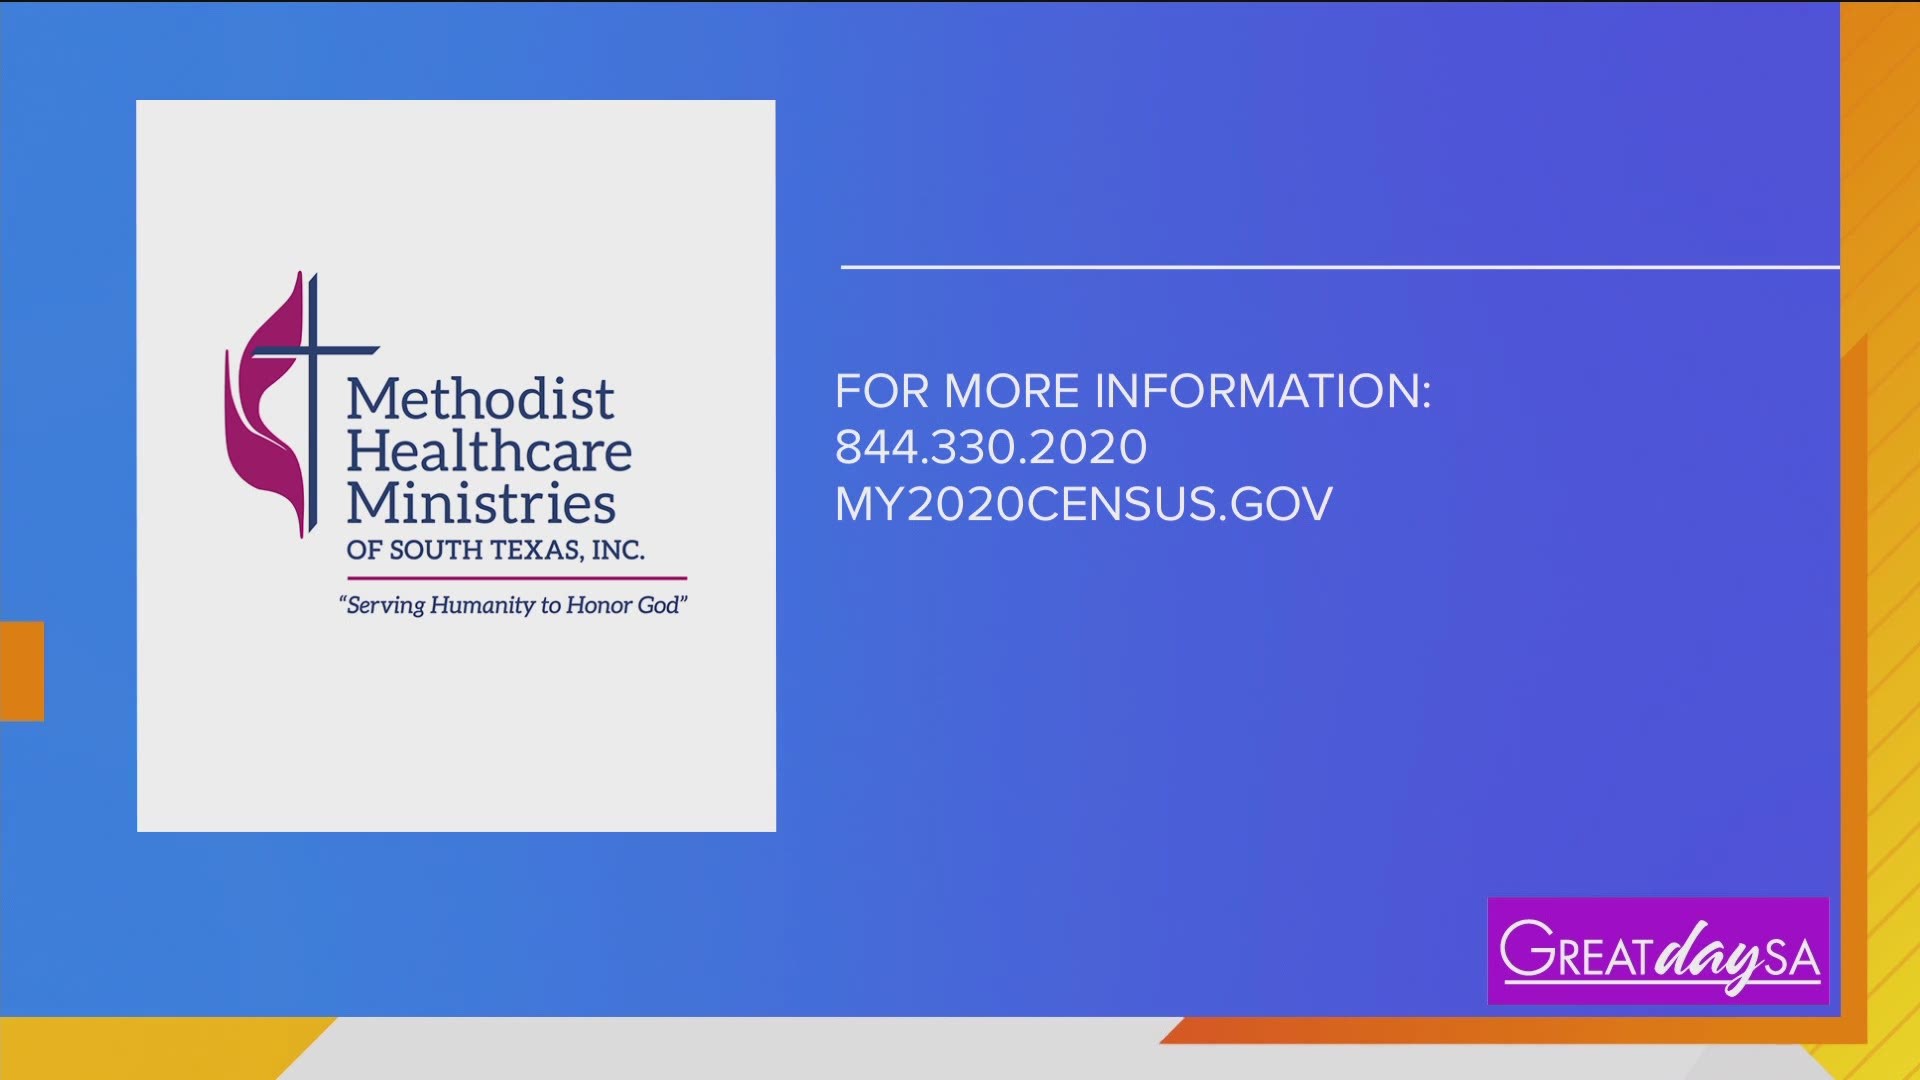 The deadline to complete the 2020 Census is September 30th. Don't miss out on the opportunity to impact San Antonio's future for the better.